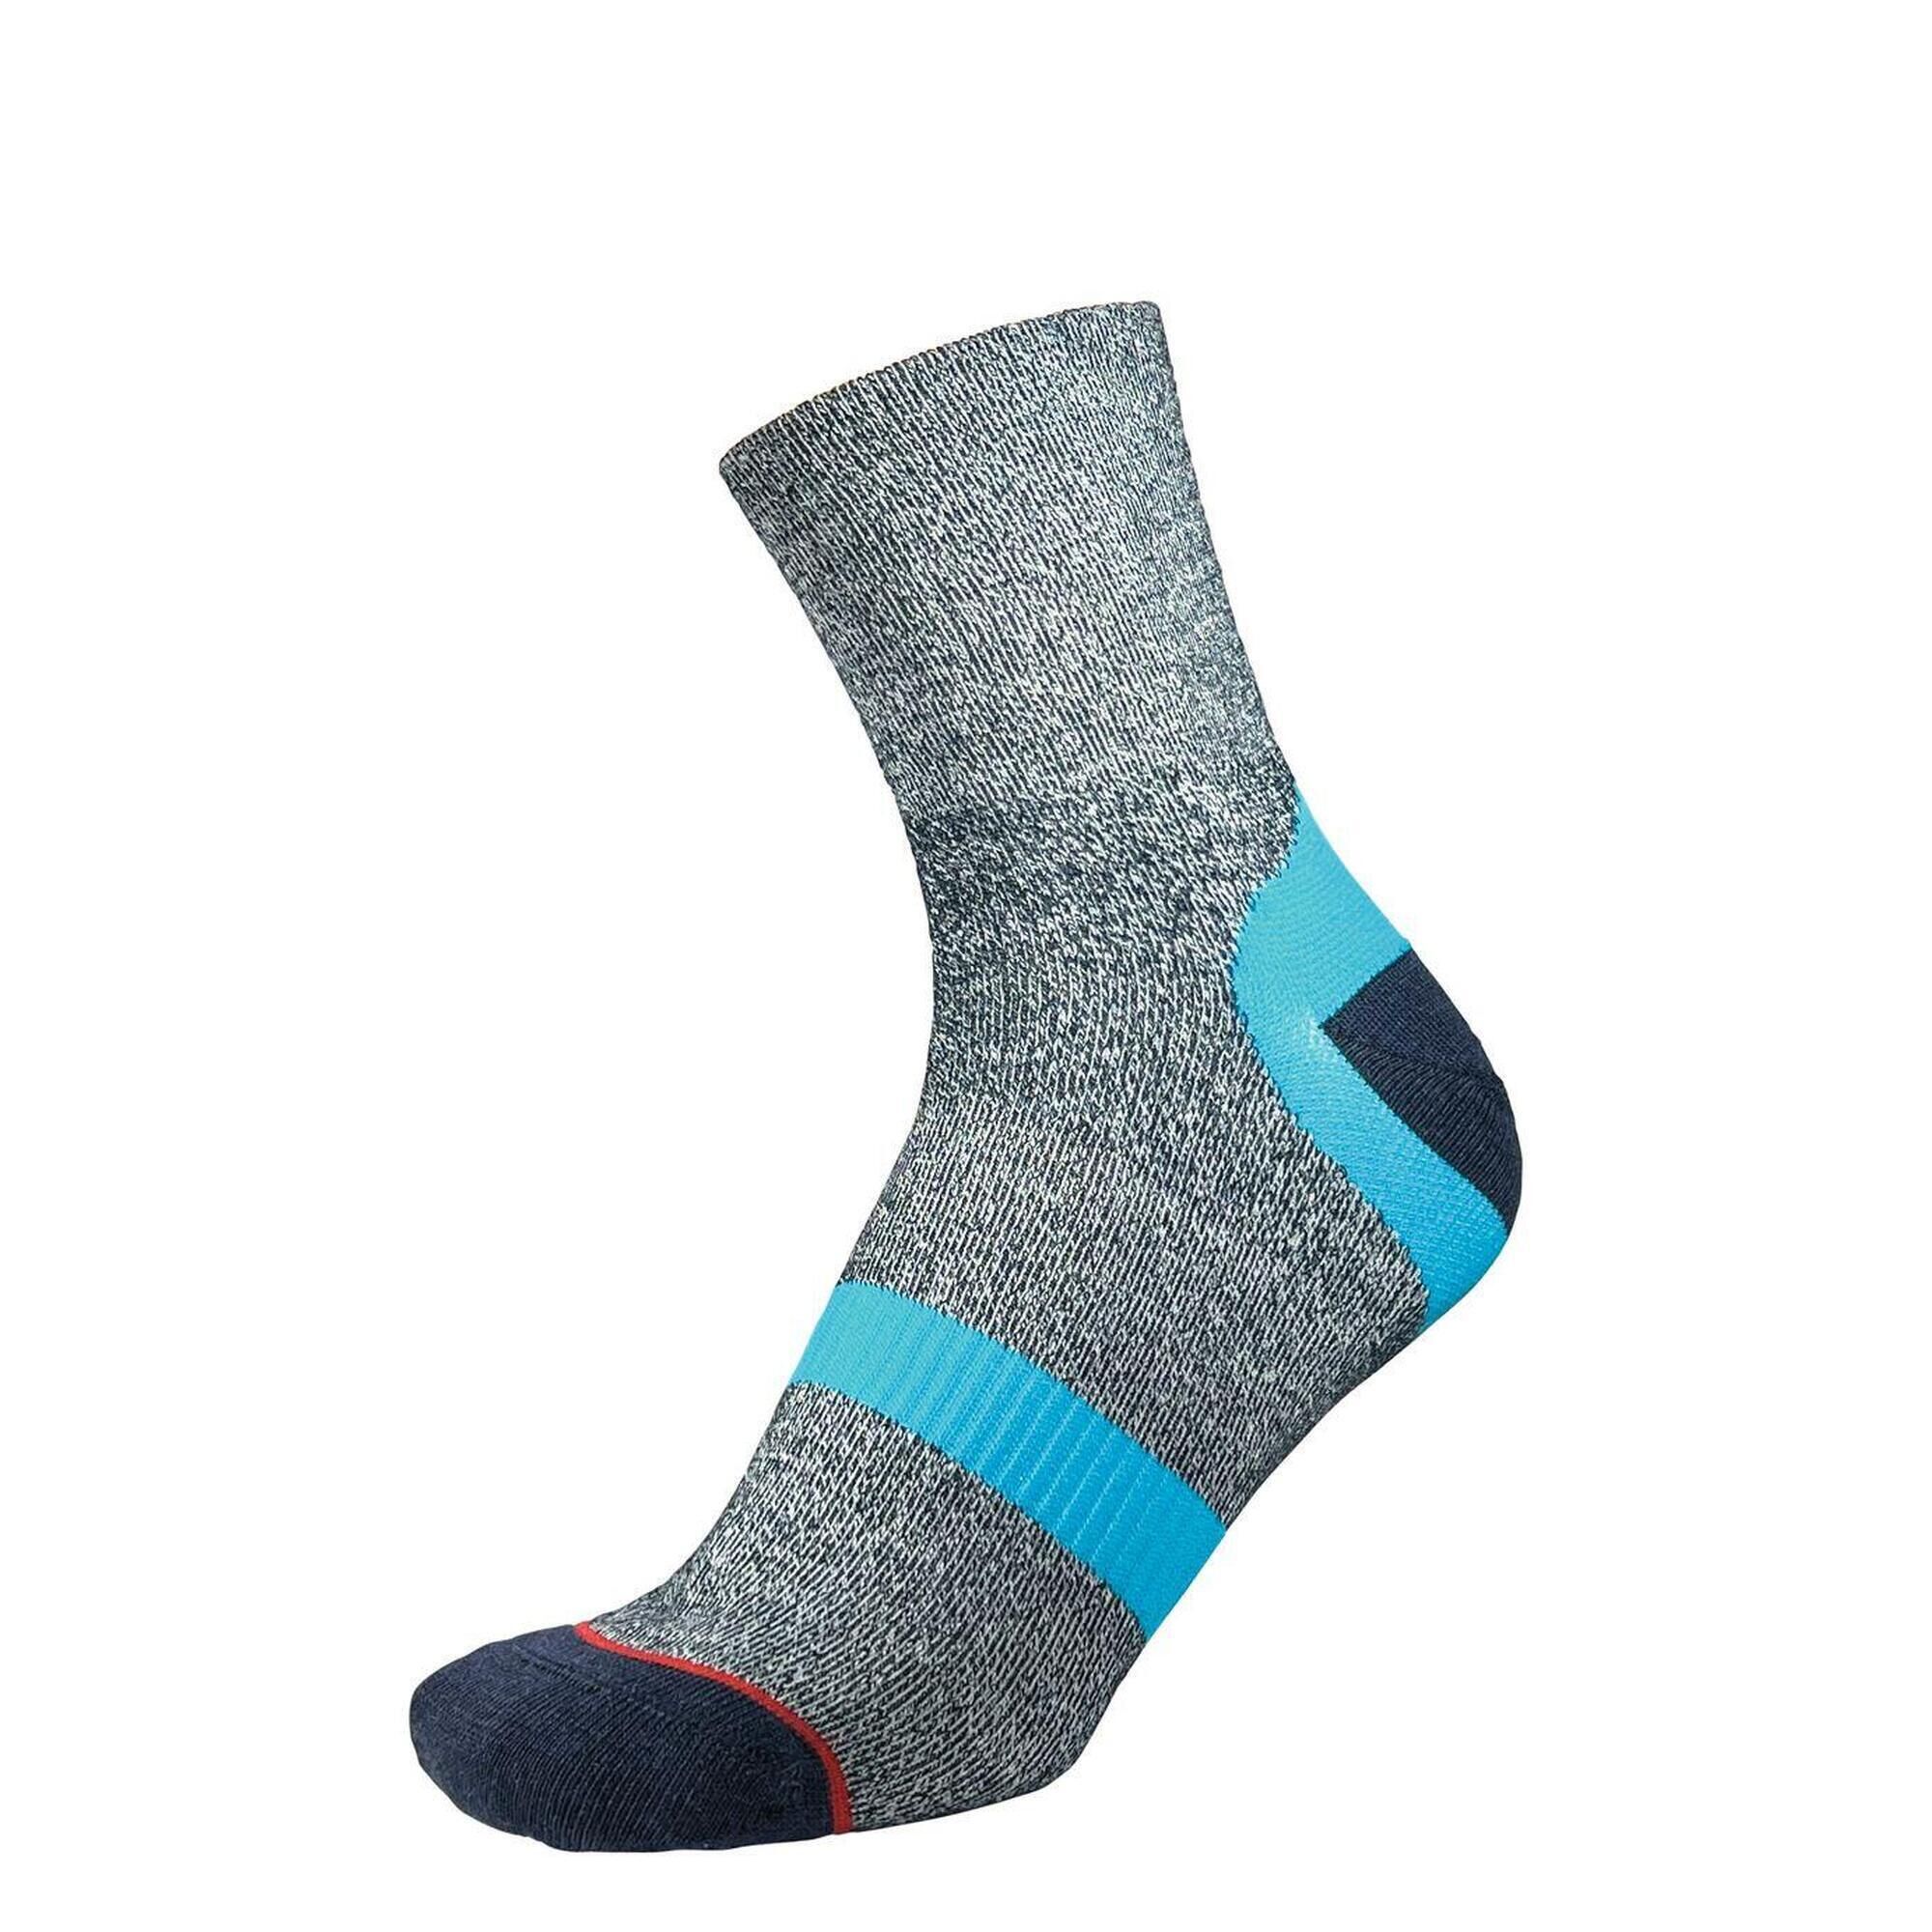 1000 MILE 1000 Mile Approach Repreve Double Layer Sock Navy Marl Kingfisher